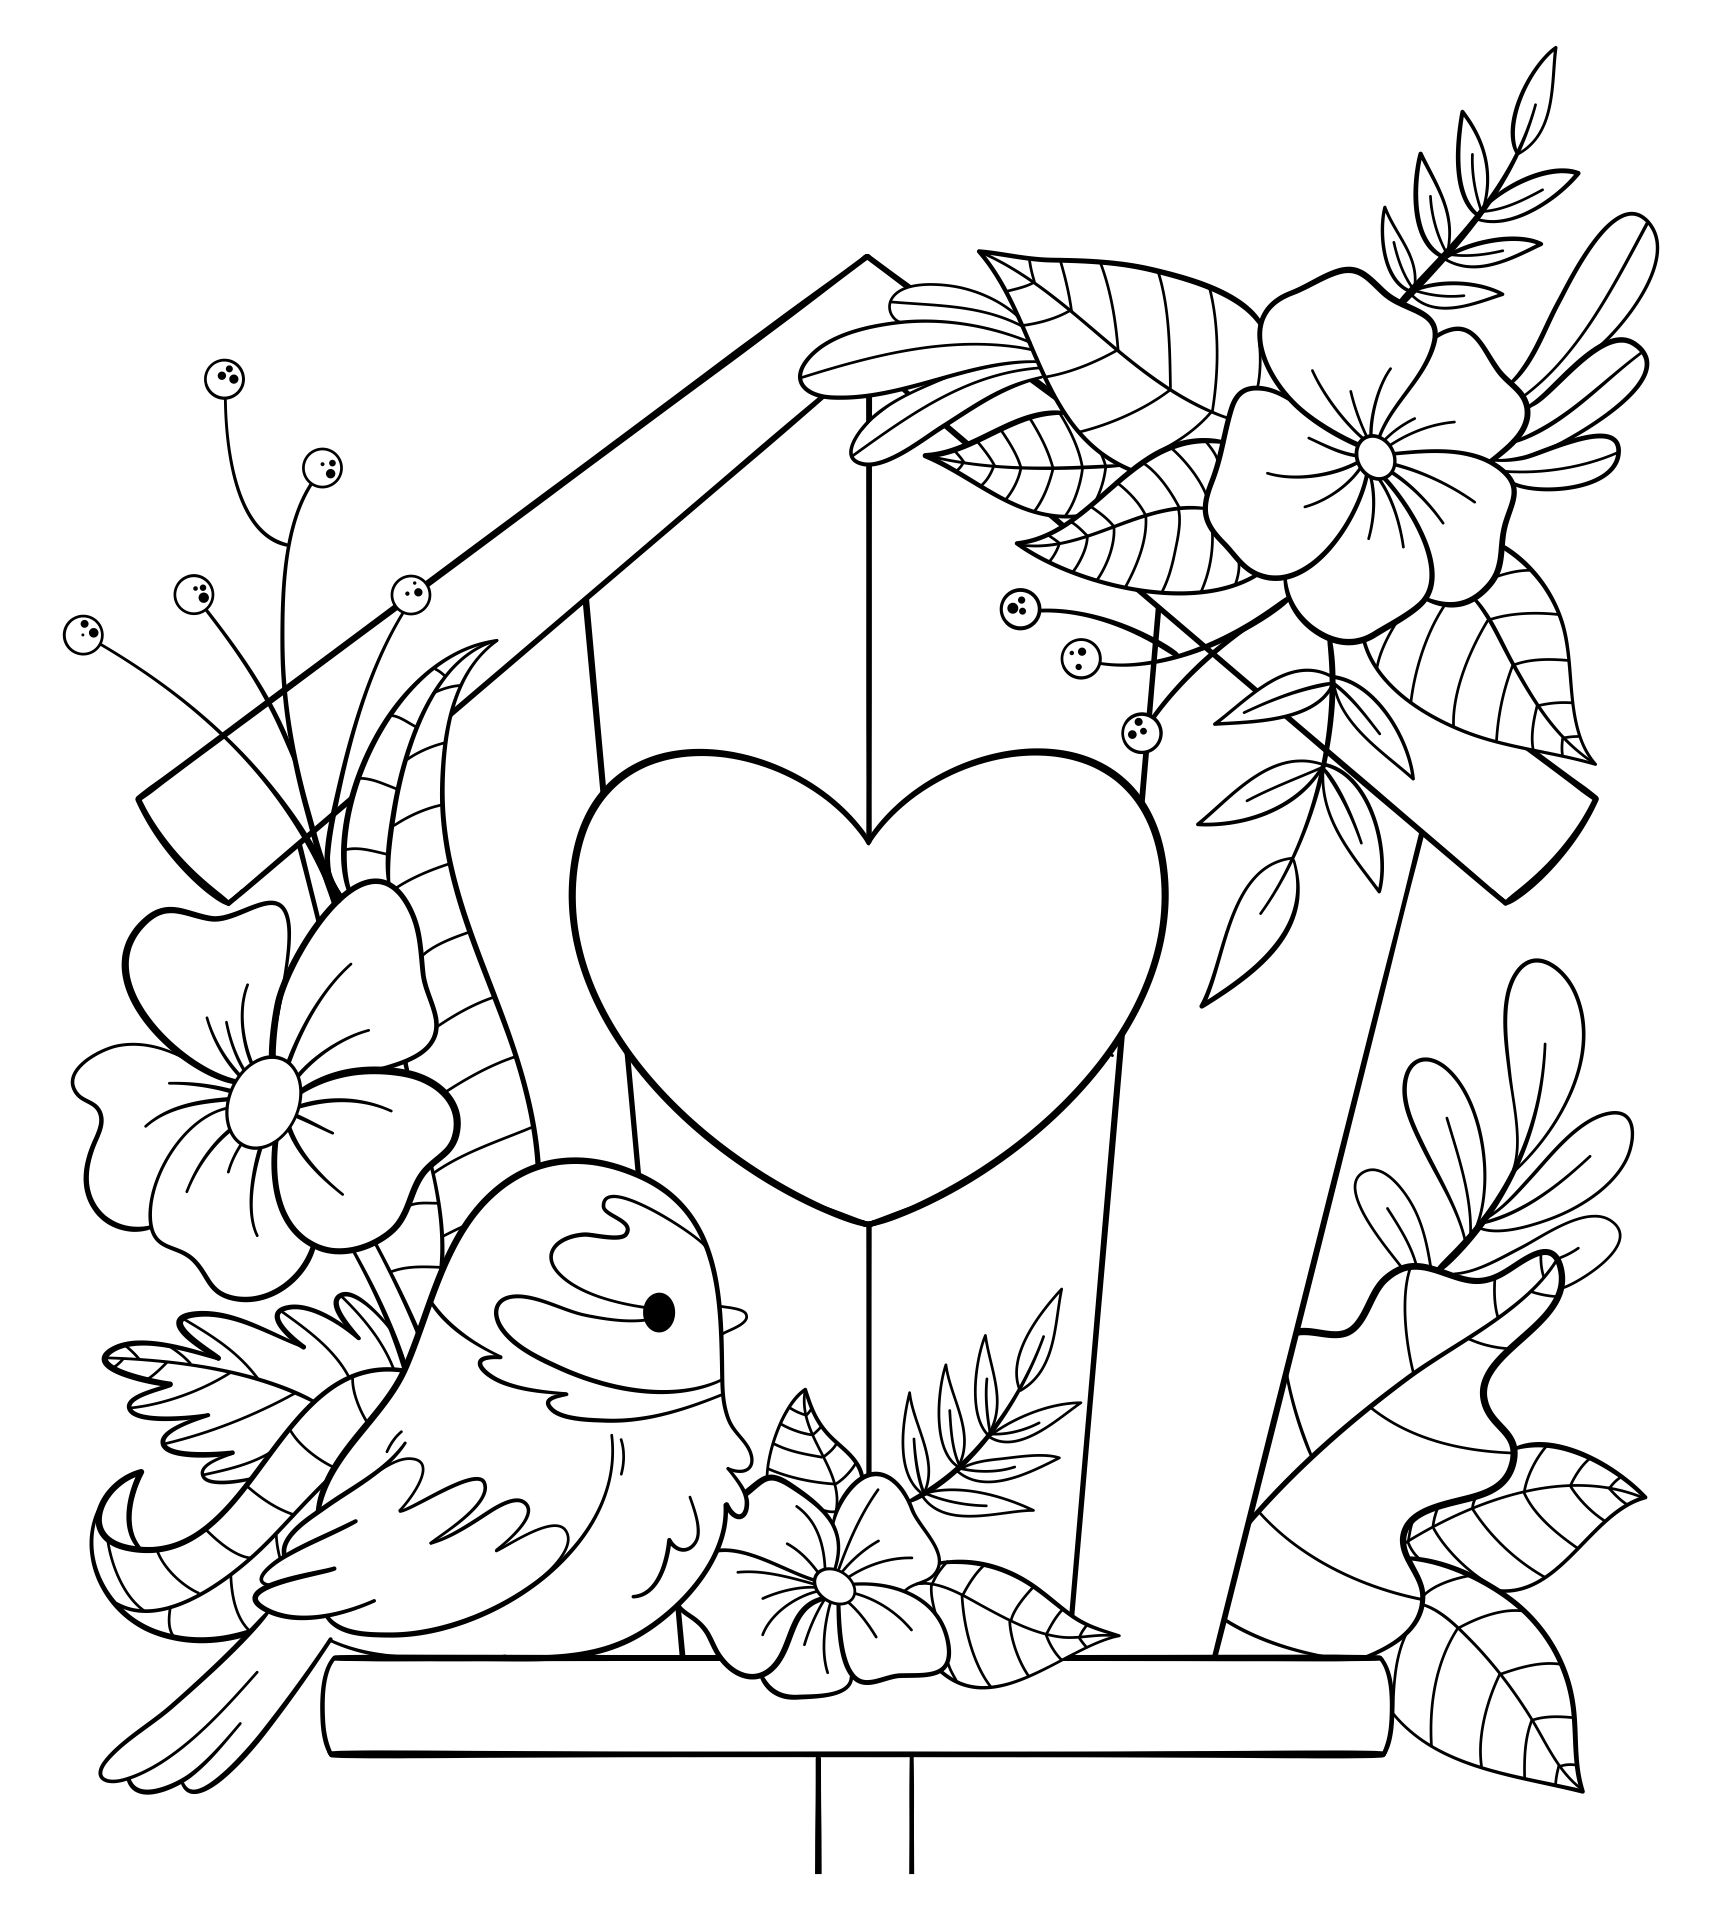 10-best-seasons-preschool-coloring-pages-printables-pdf-for-free-at